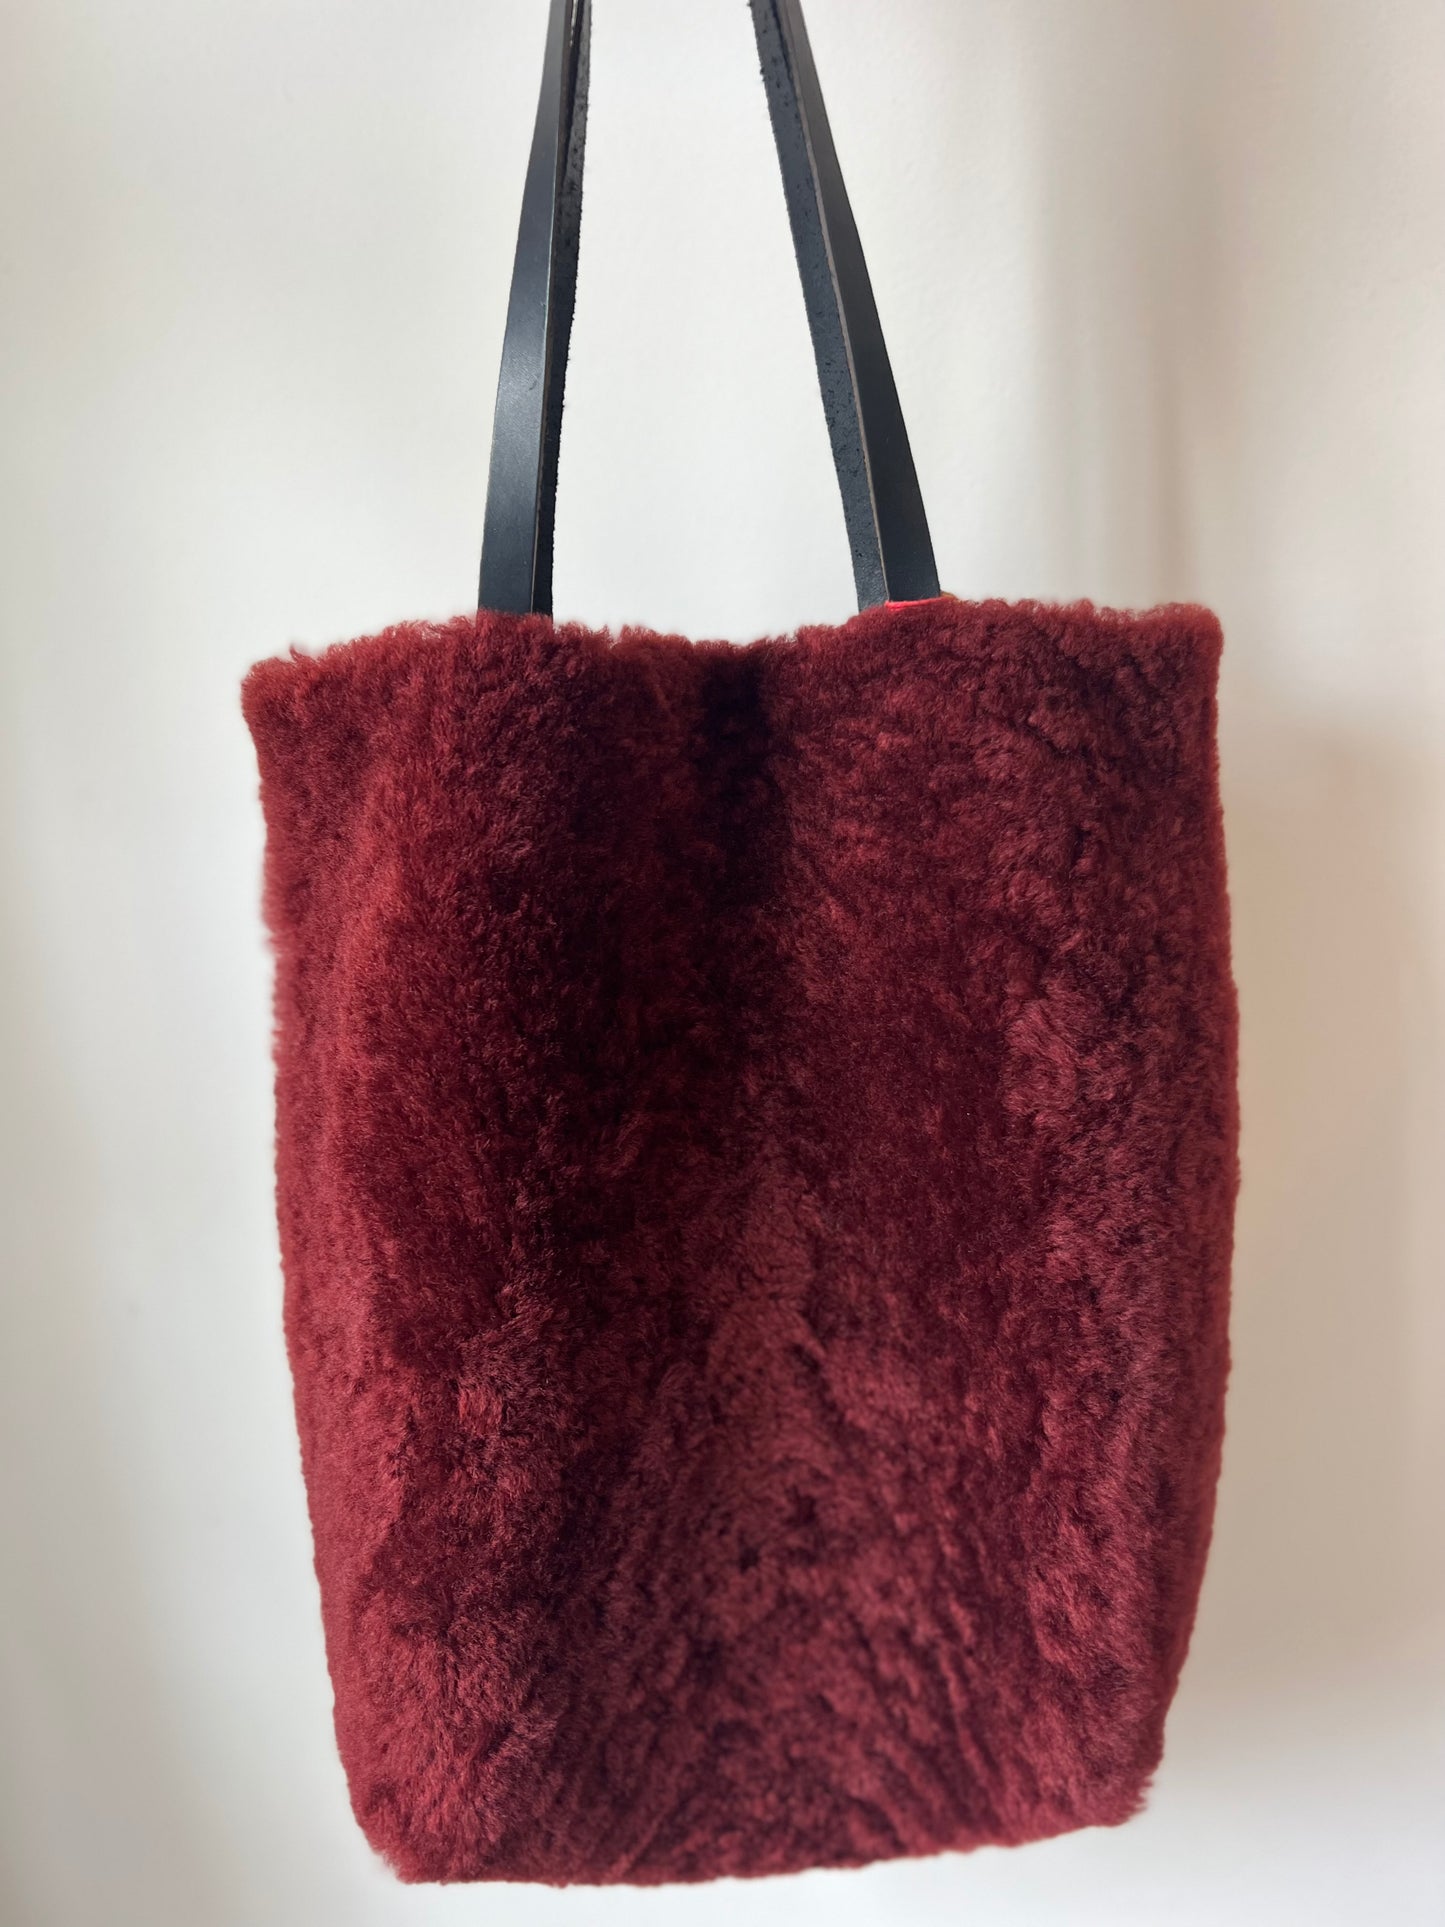 Nothing New - Repurposed Leather Tote Bag - Red